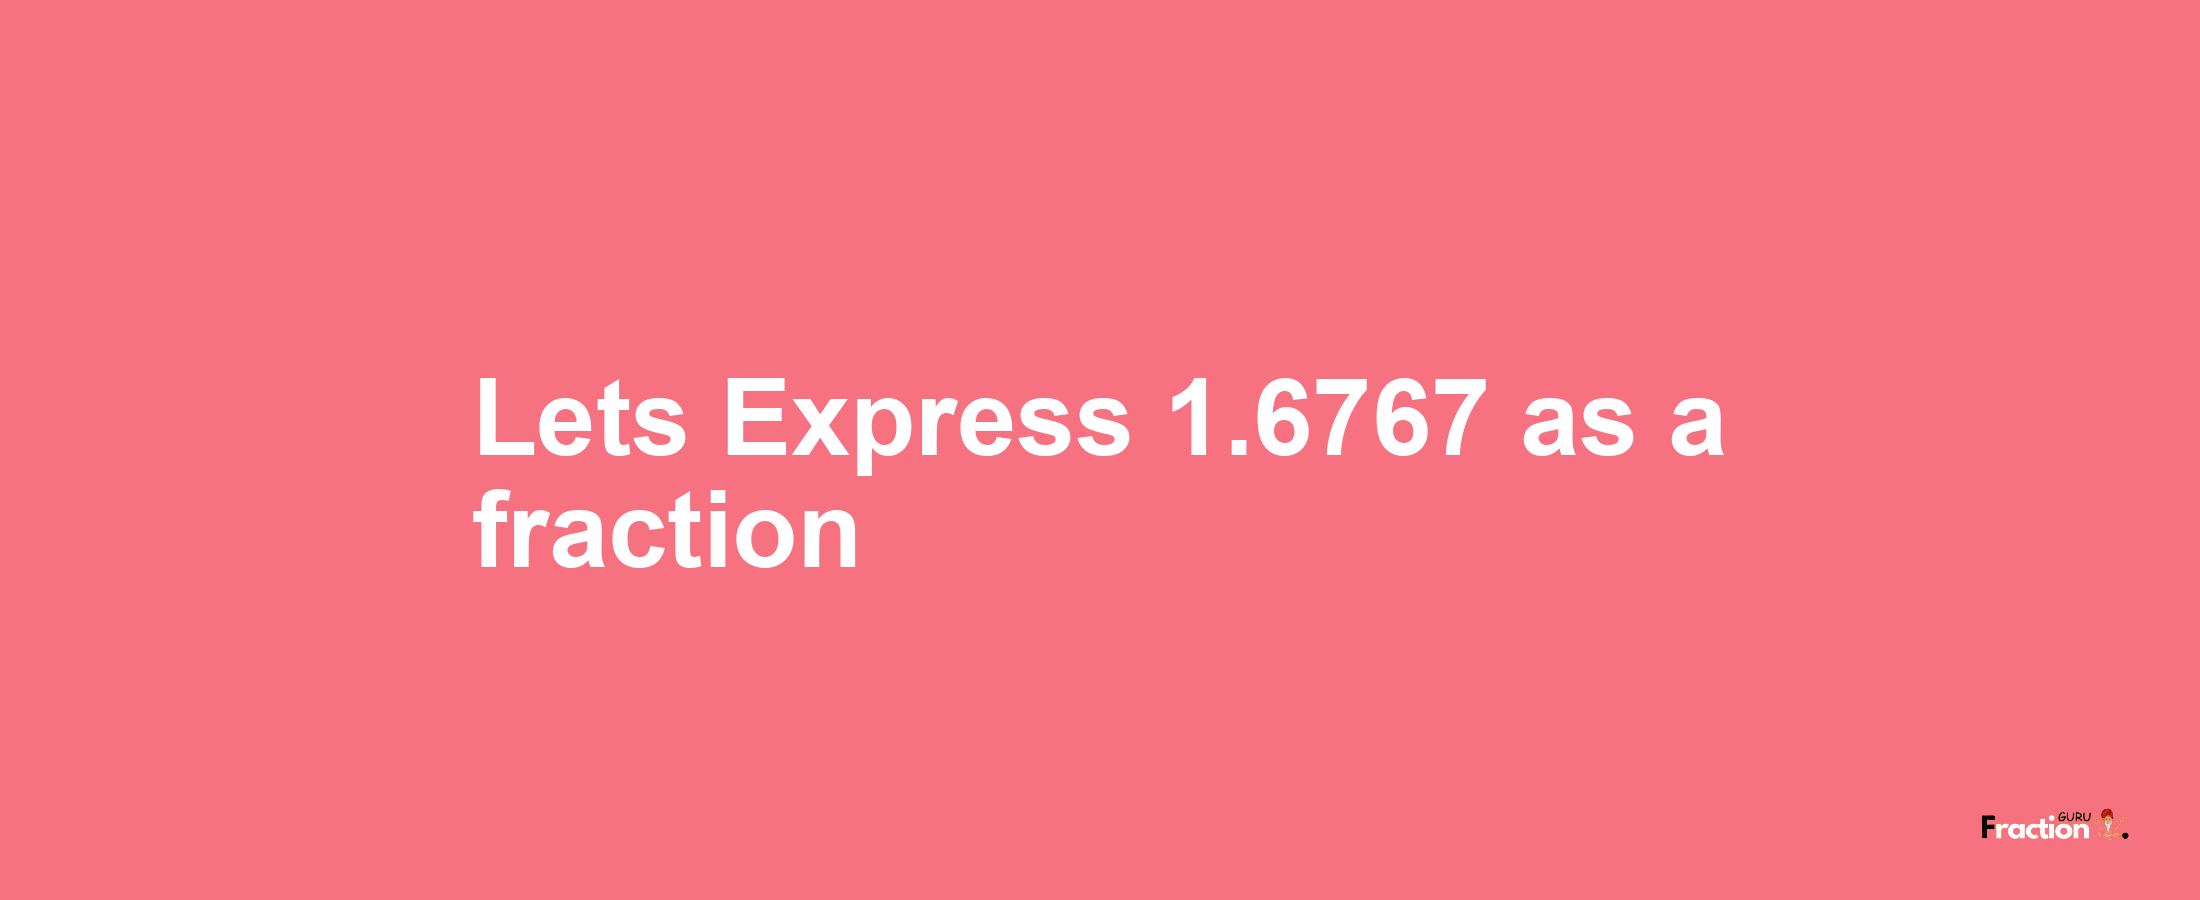 Lets Express 1.6767 as afraction